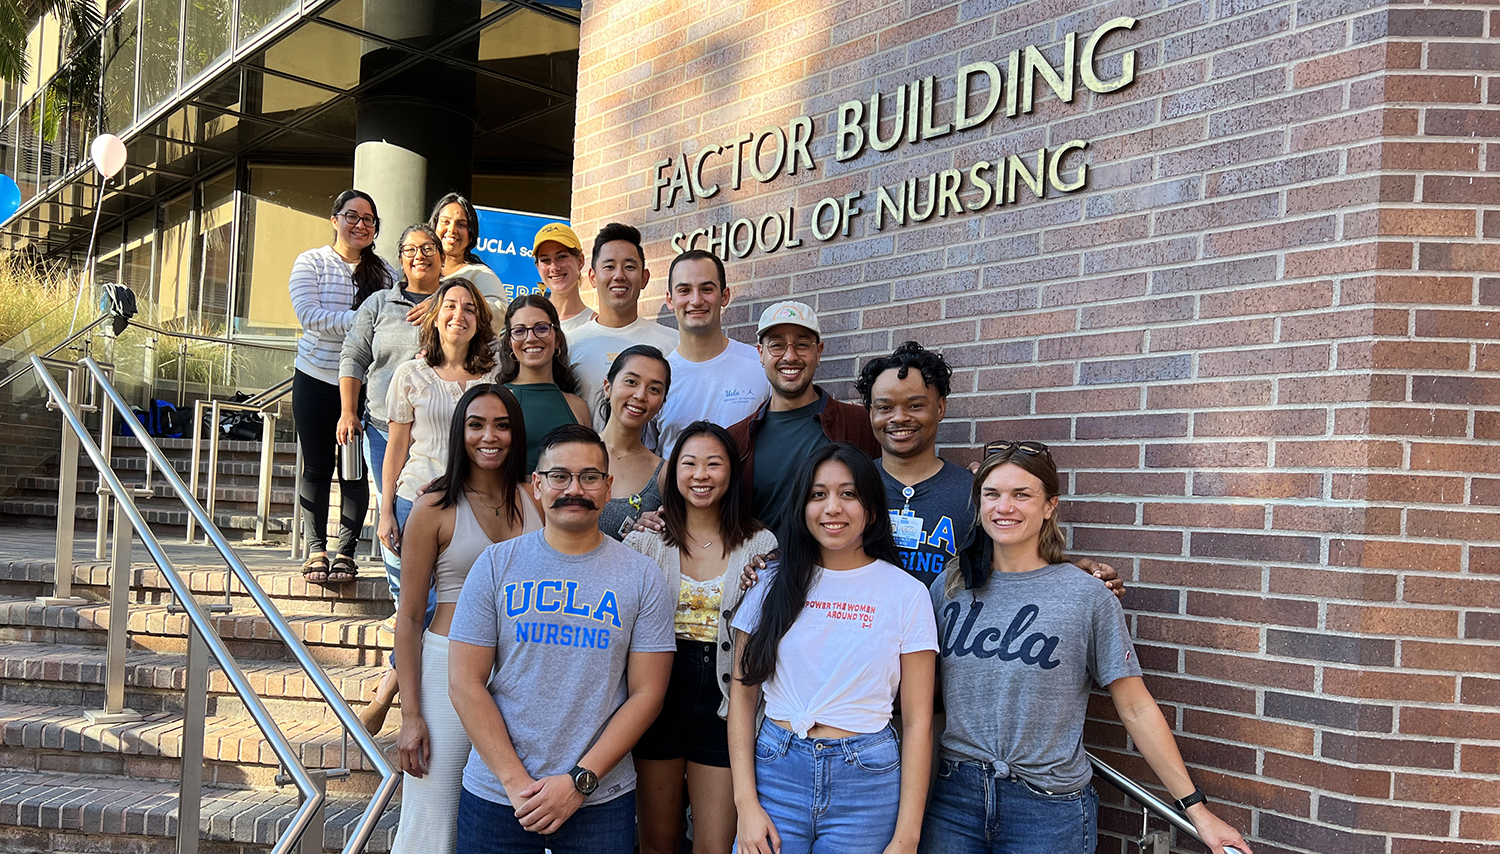 Nursing students standing in front of the UCLA Nursing main entrance